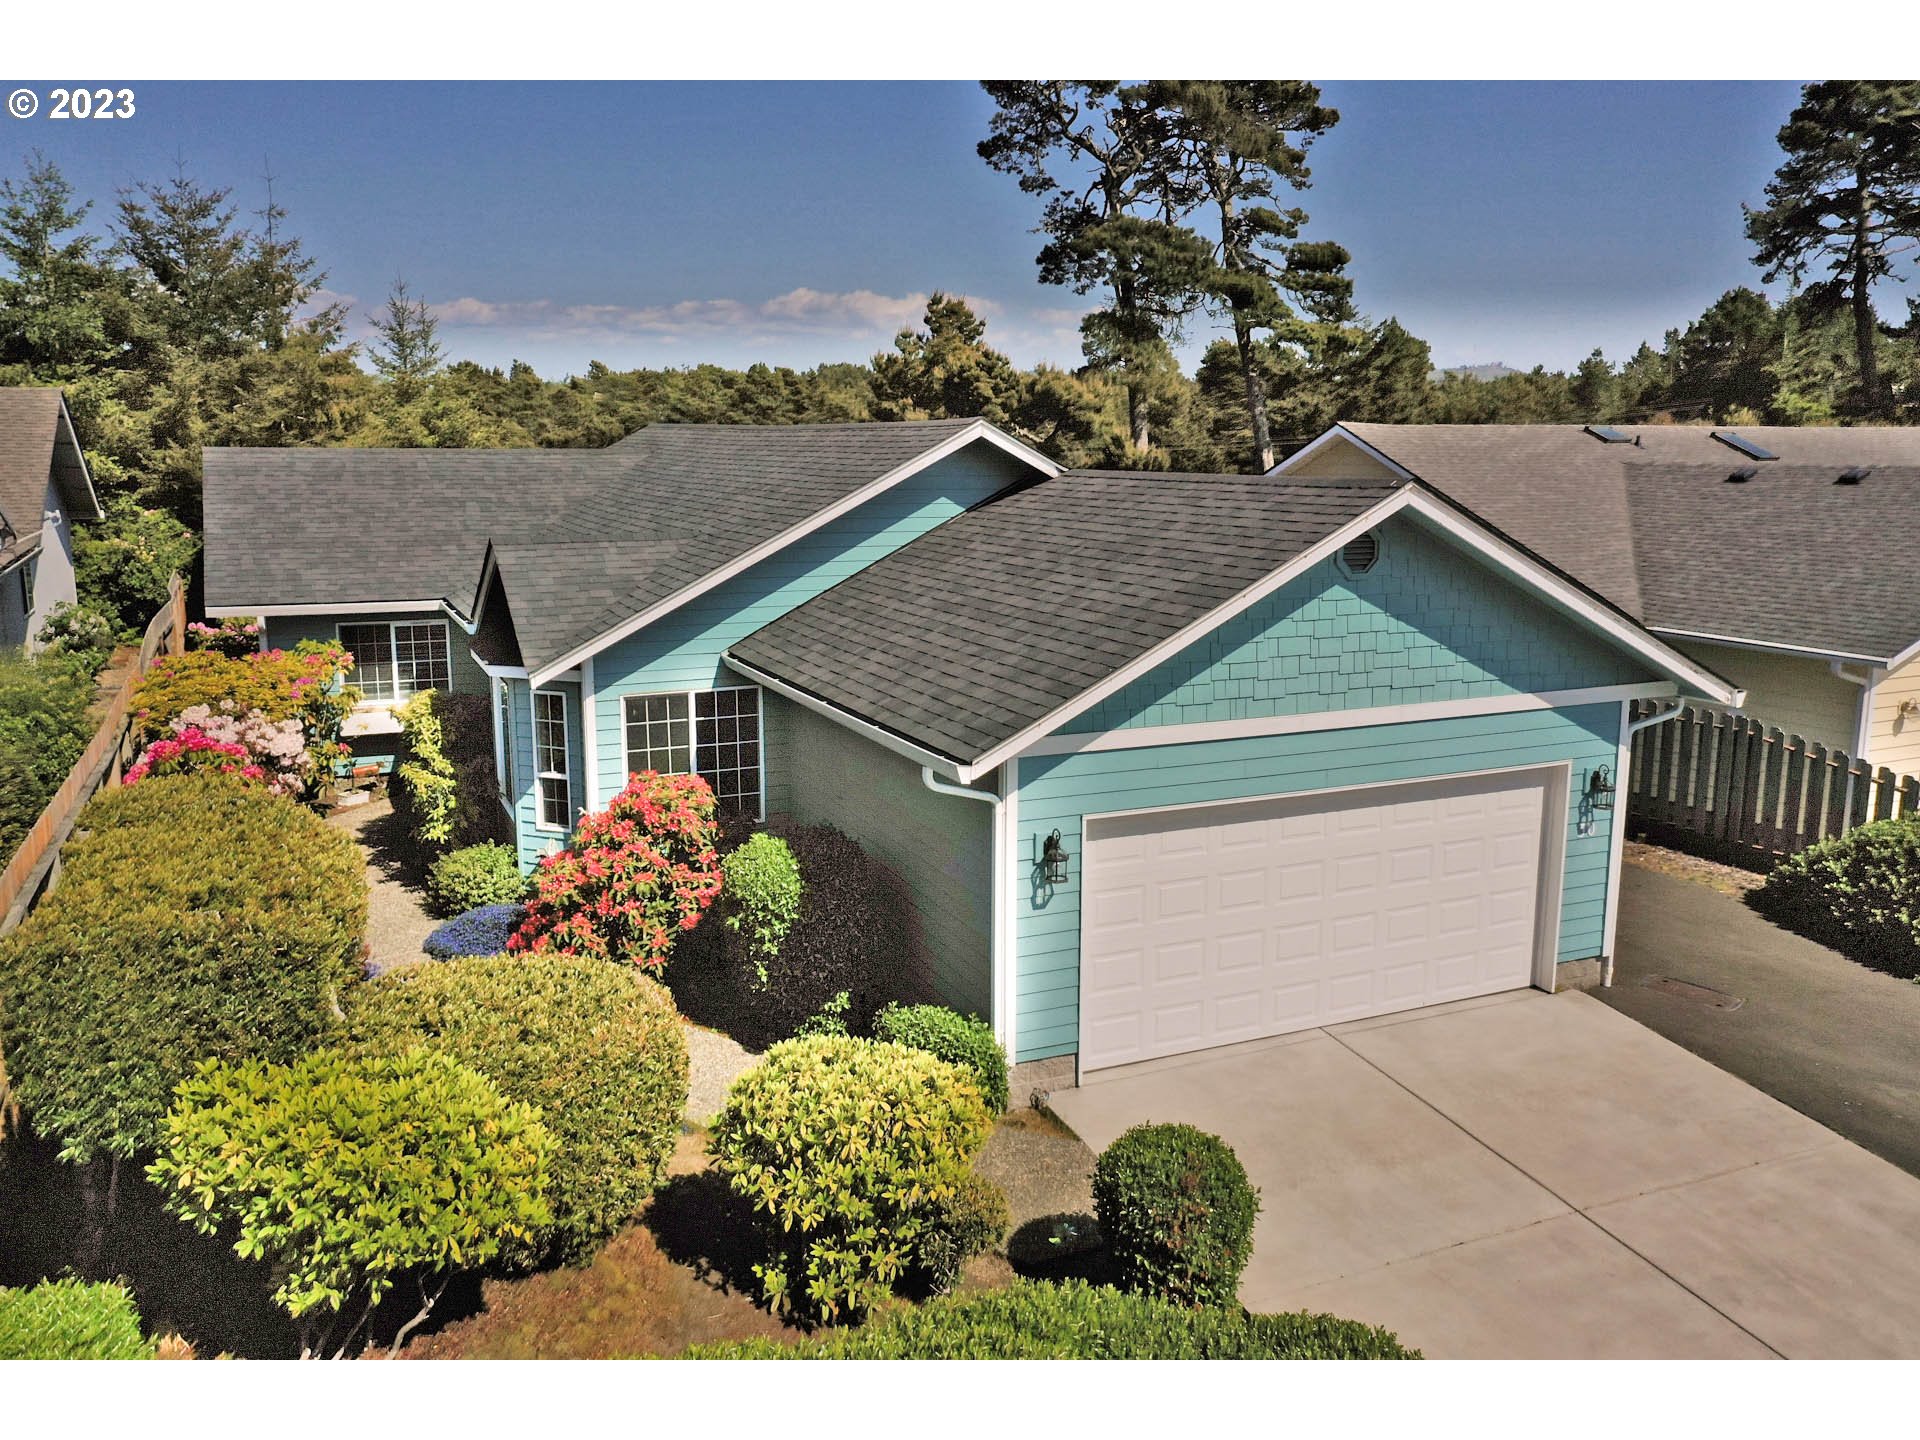 30 MARIELLE LN, Florence, OR 97439